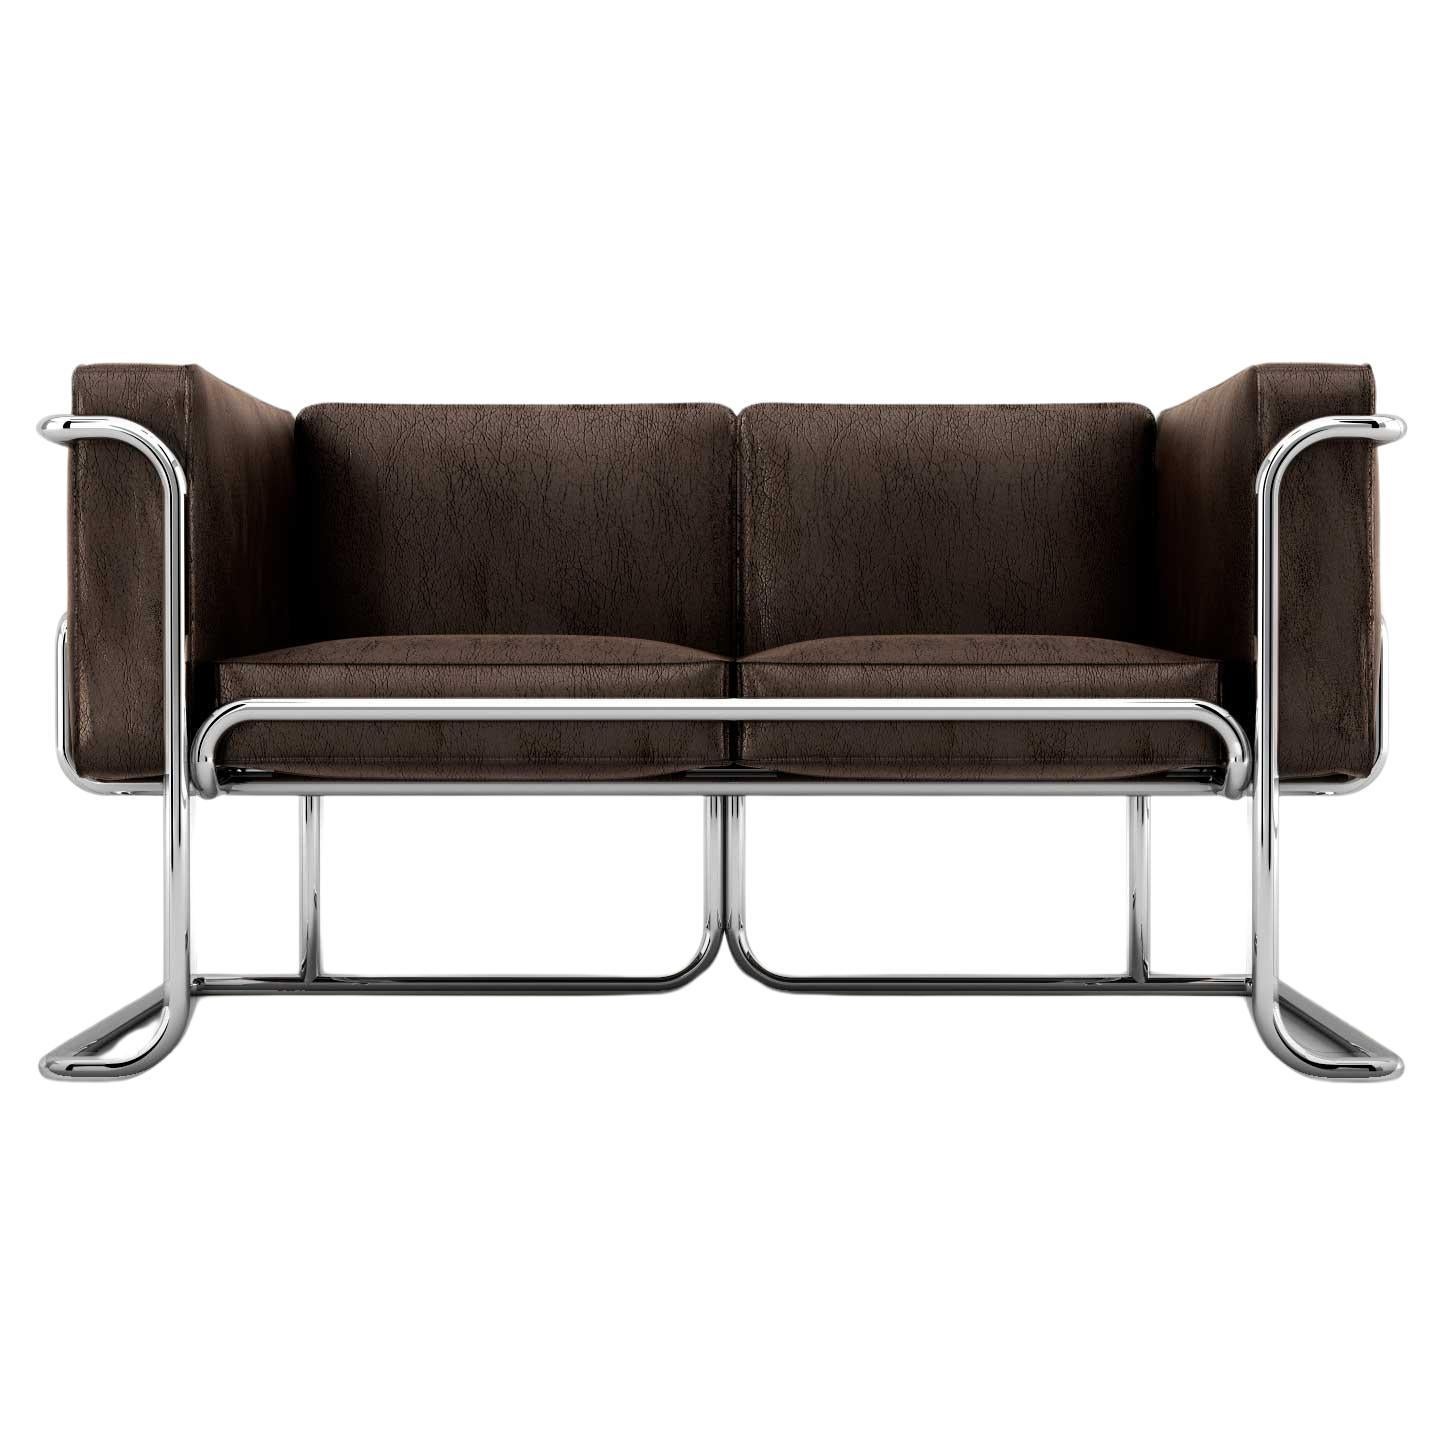 Lotus 2 Seat Sofa - Modern Brown Leather Sofa with Stainless Steel Legs For Sale